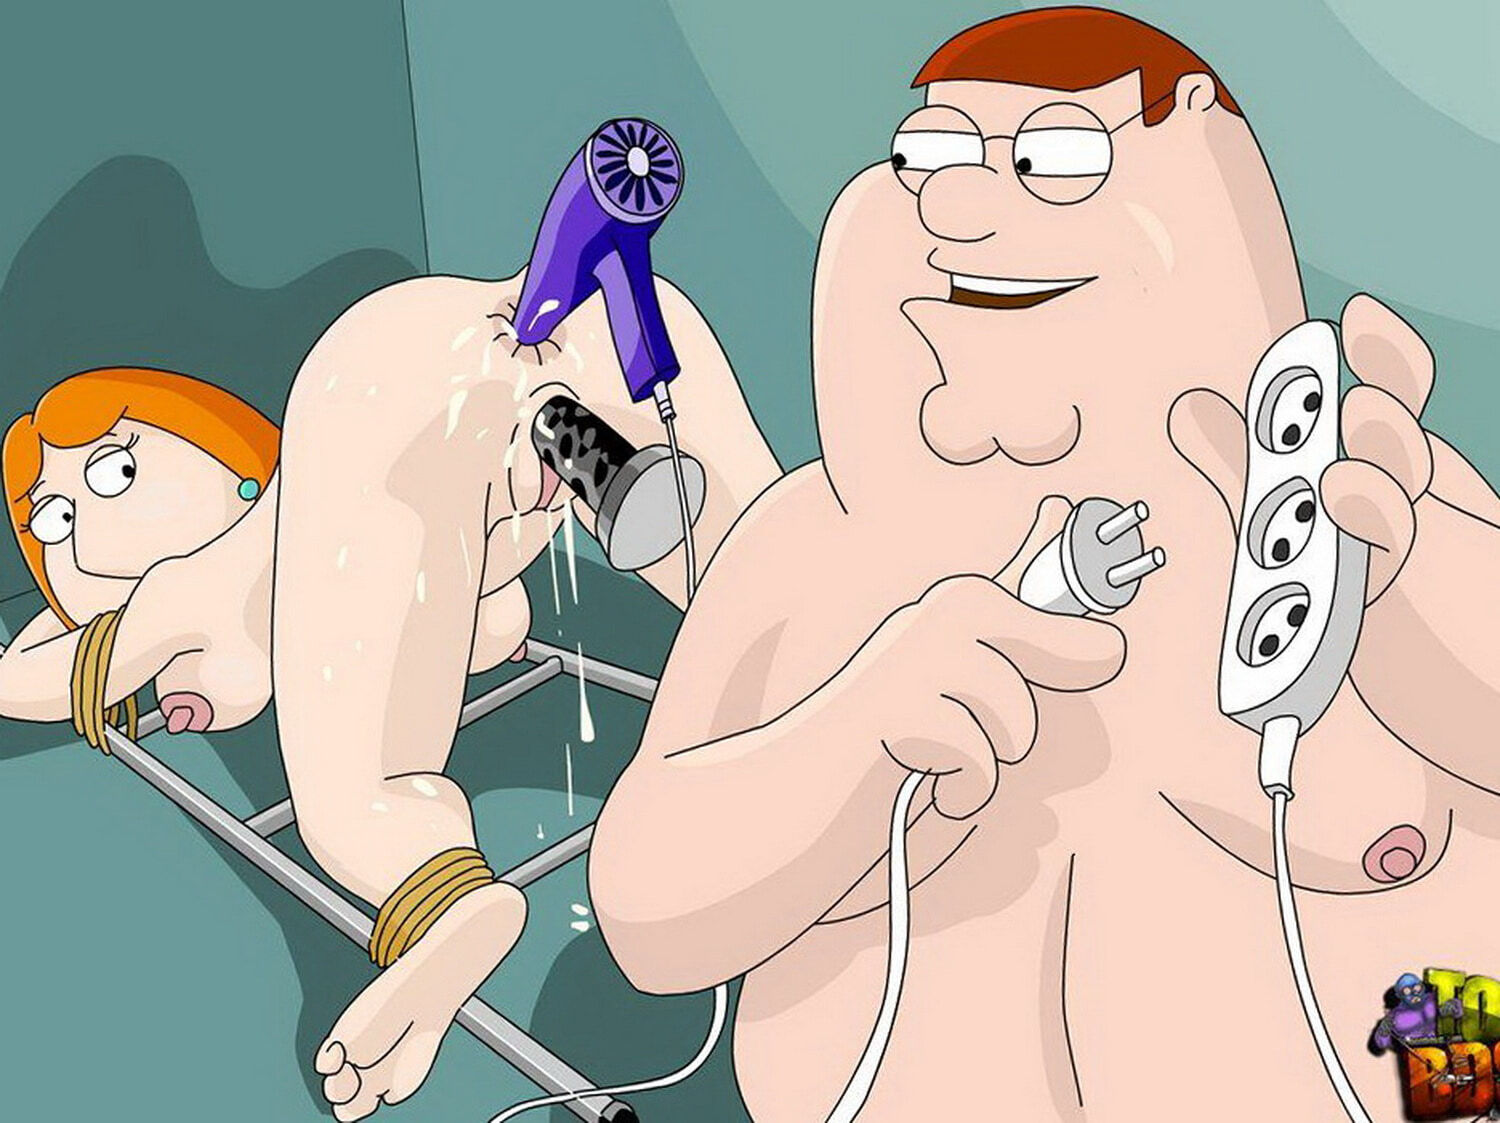 Lois Griffin Nude